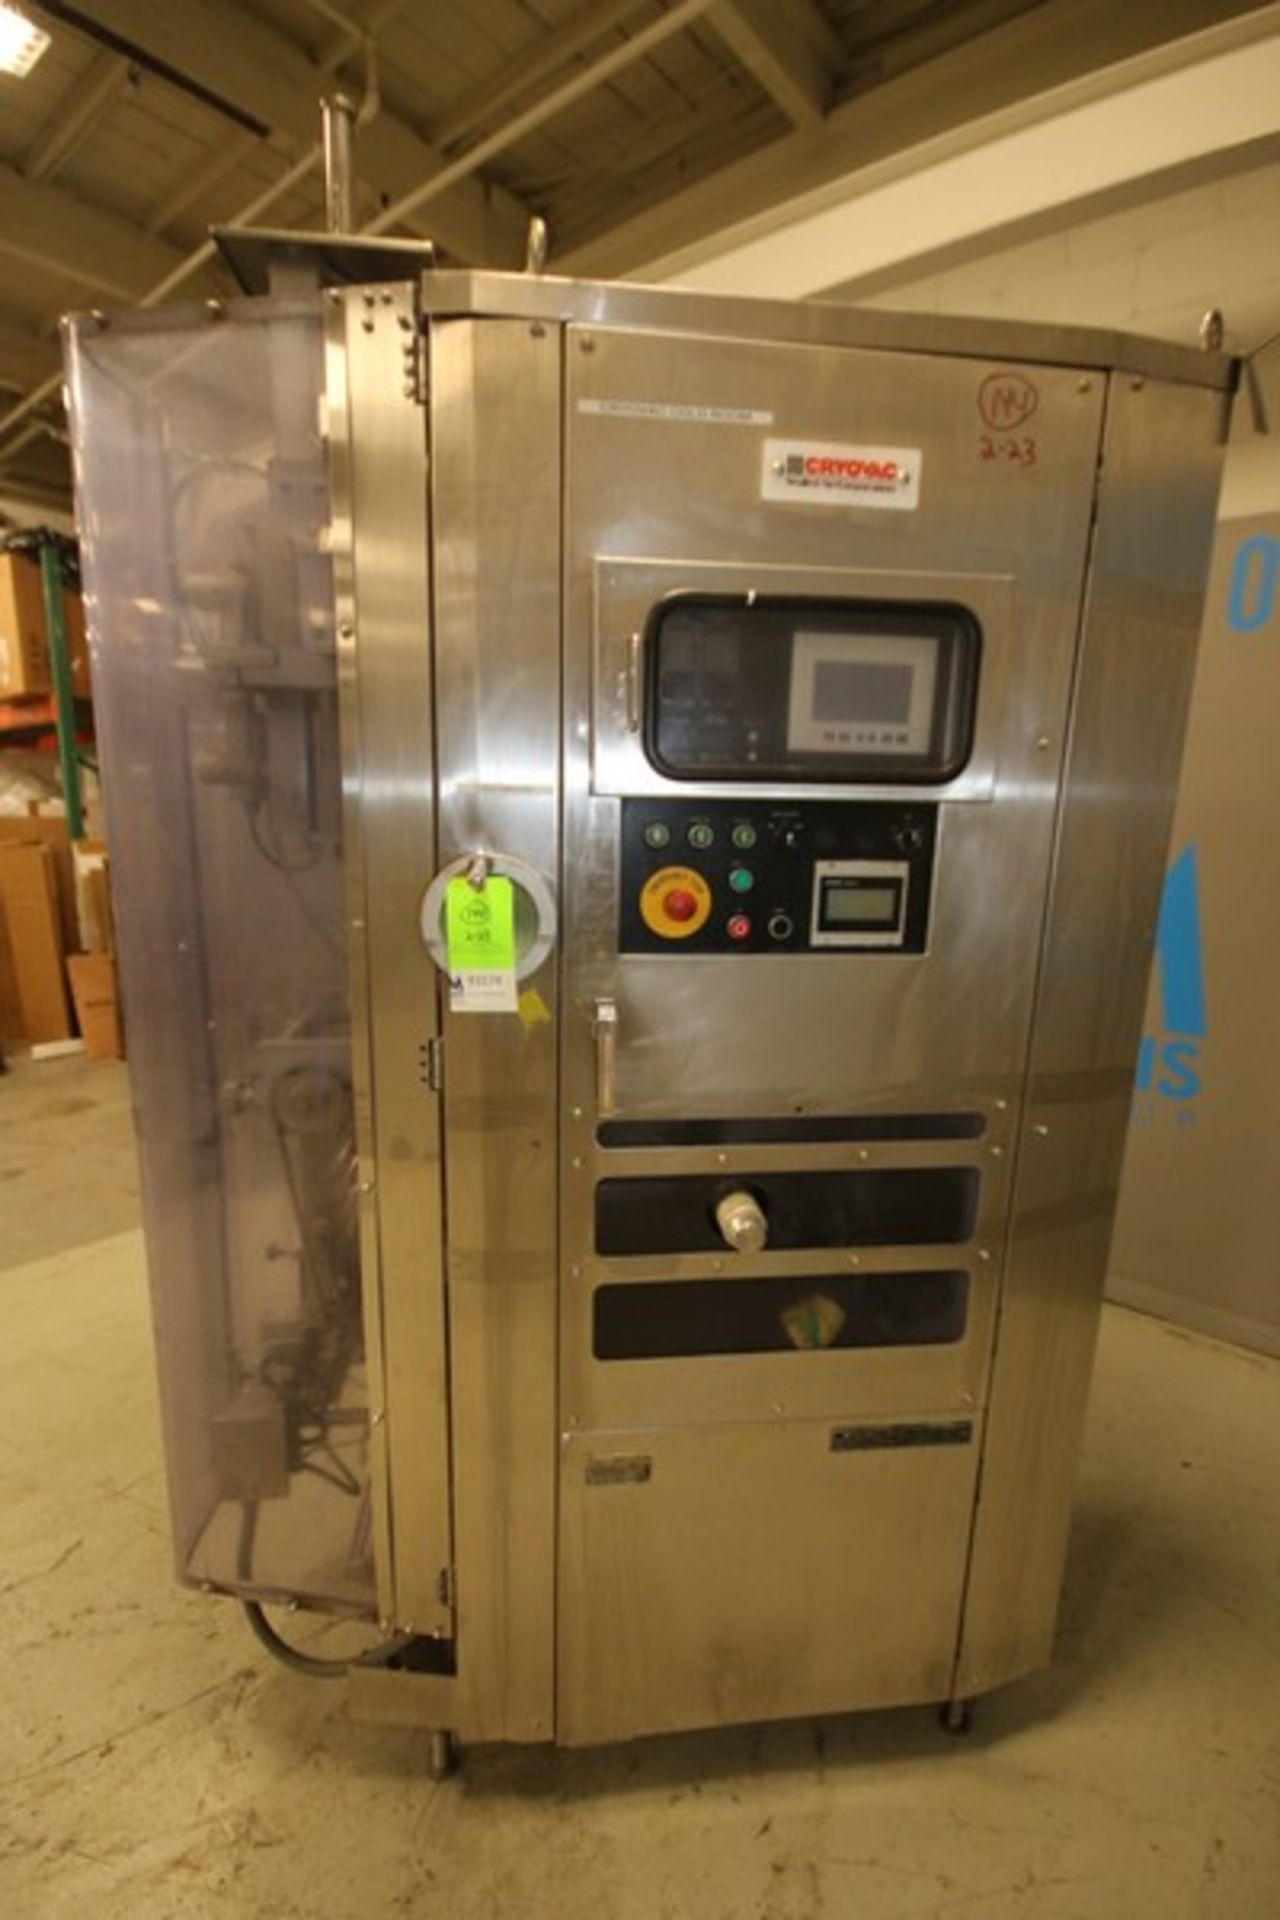 Cryovac / Orihiro Co. Onpack 2050 Vertical Forms Fill & Seal (VFFS) Liquid Bagging Machine, Model - Image 6 of 12